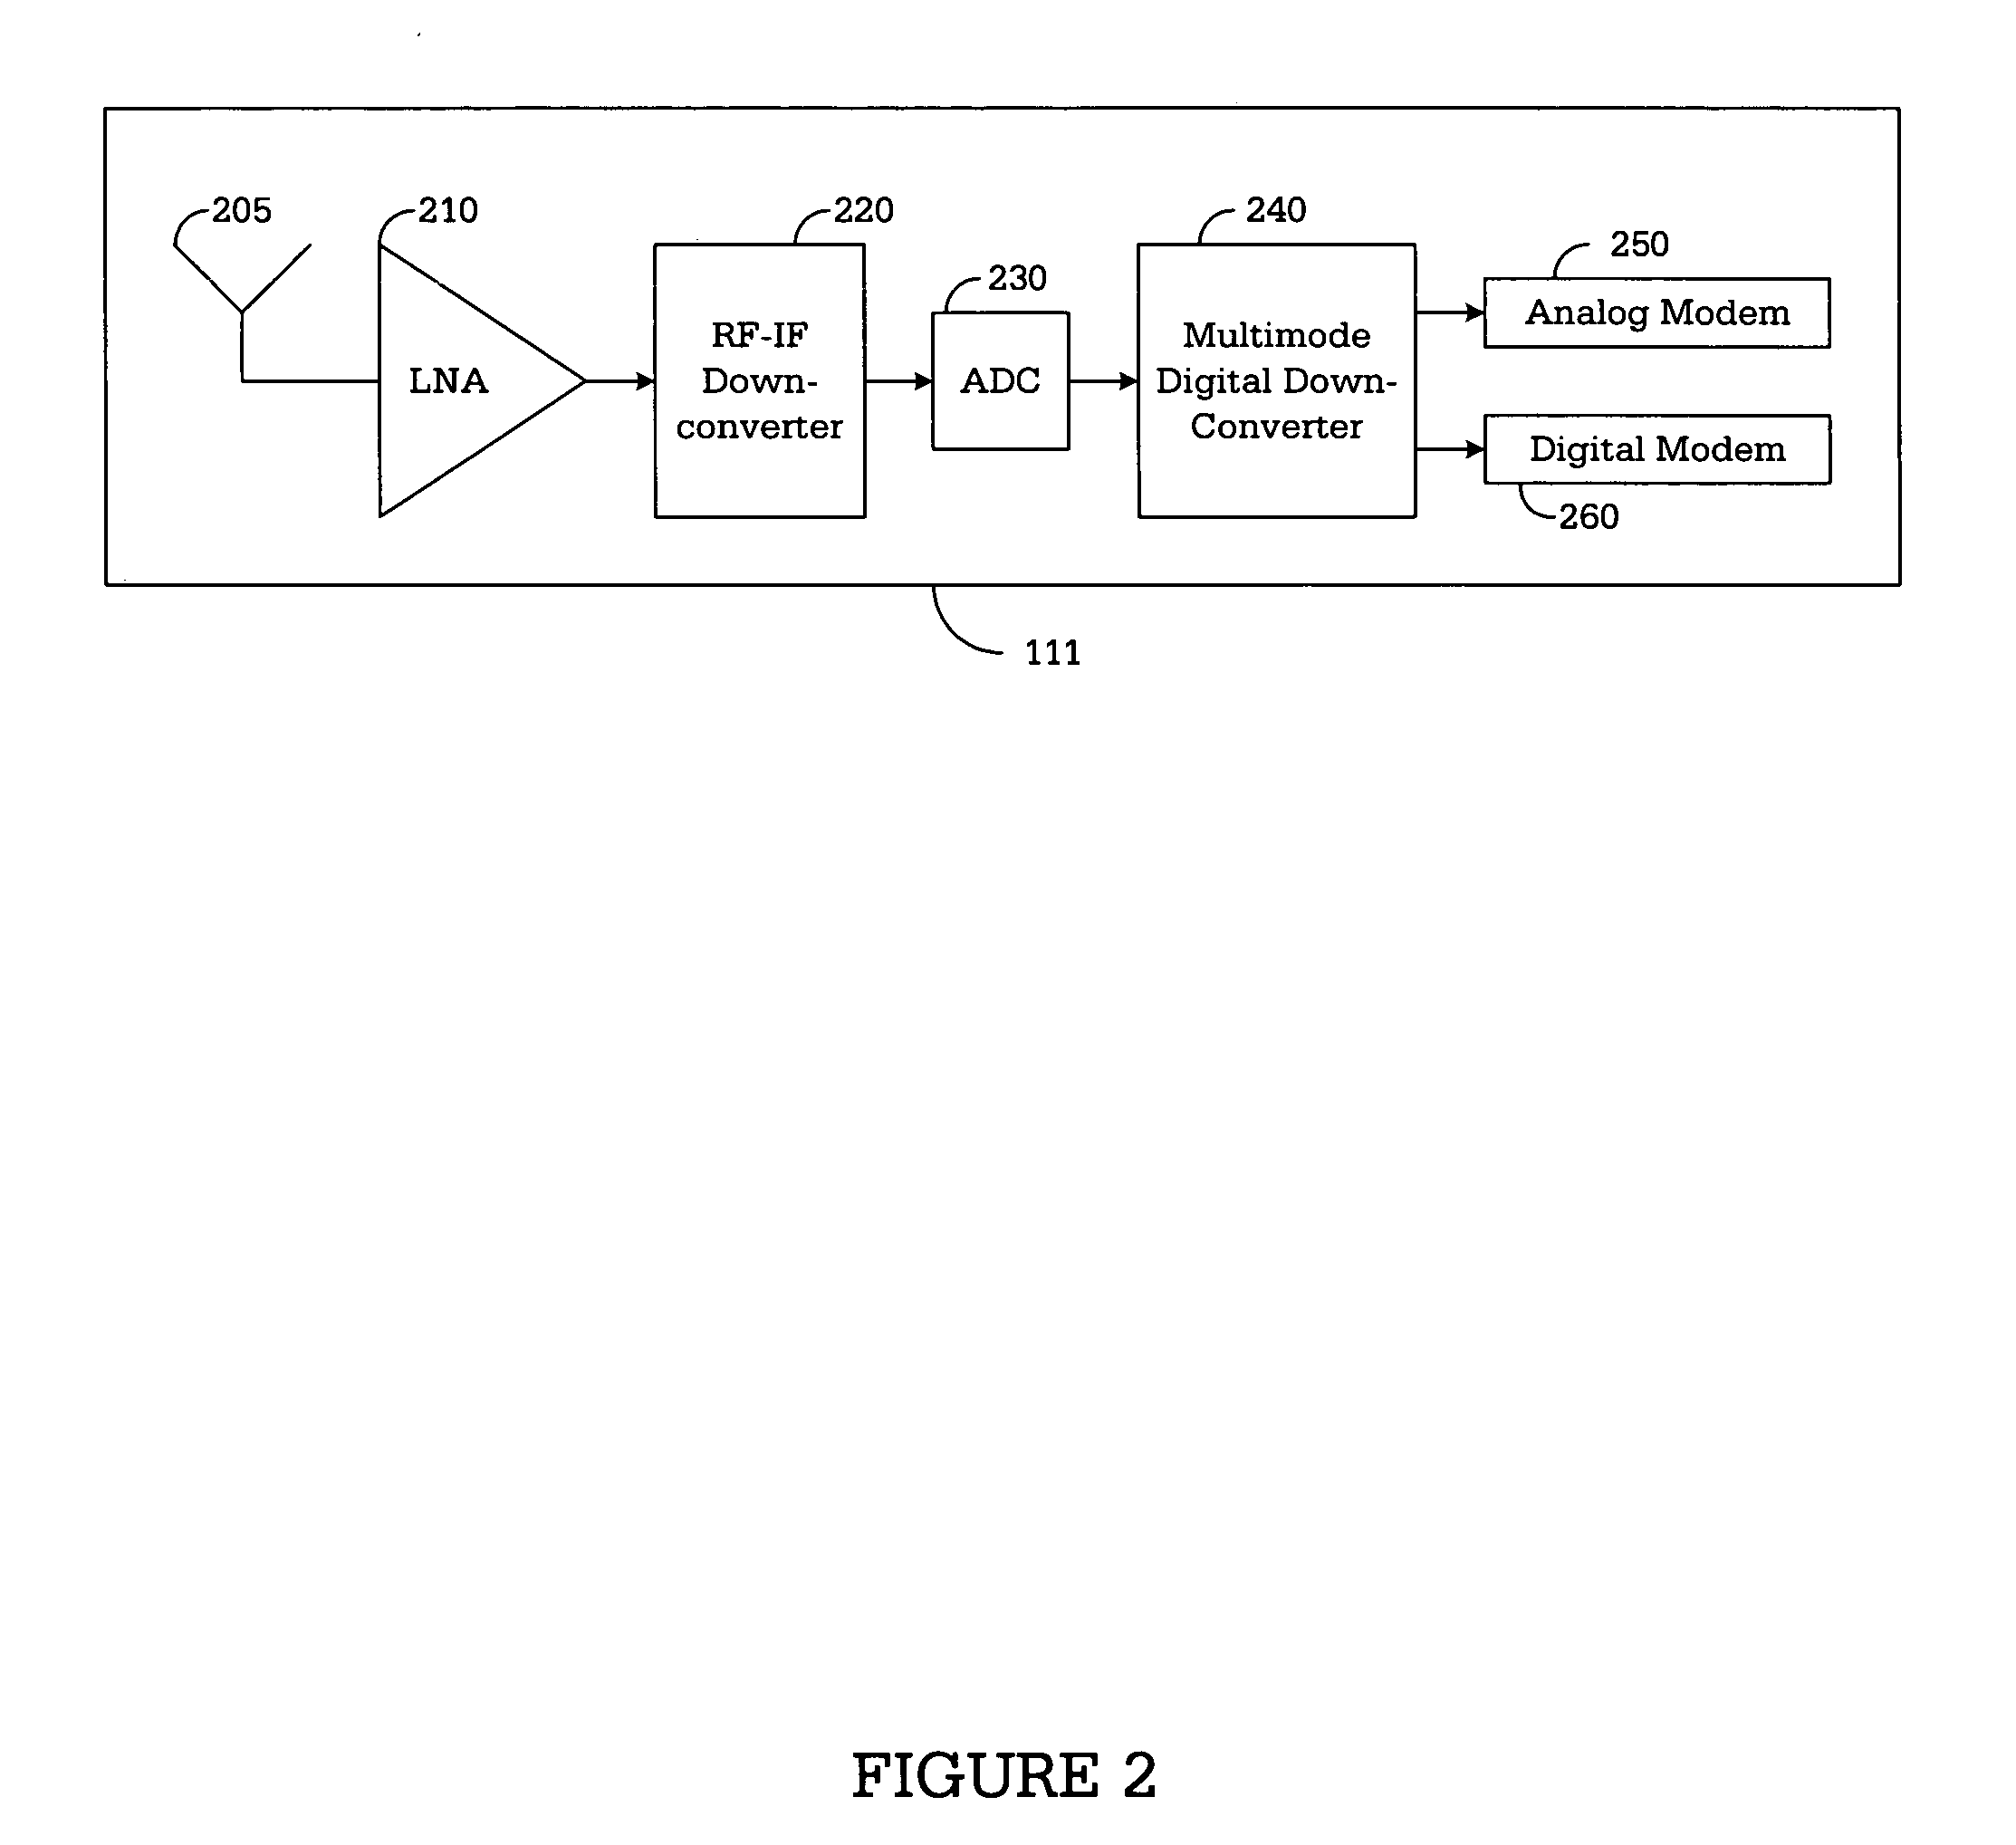 Apparatus and method for digital down-conversion in a multi-mode wireless terminal